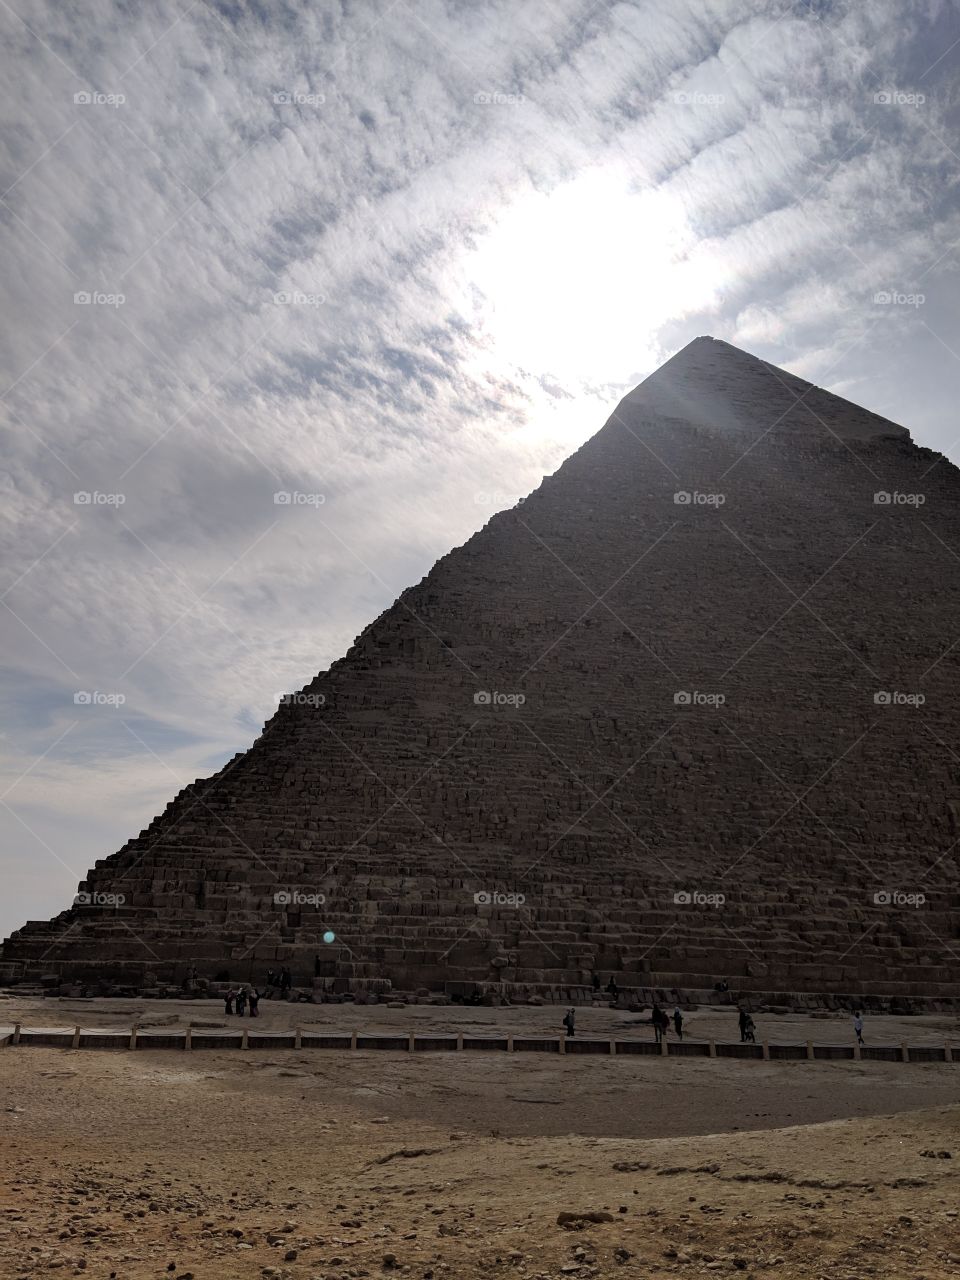 The sun going down behind the Pyramid of Khafre in Giza, Egypt